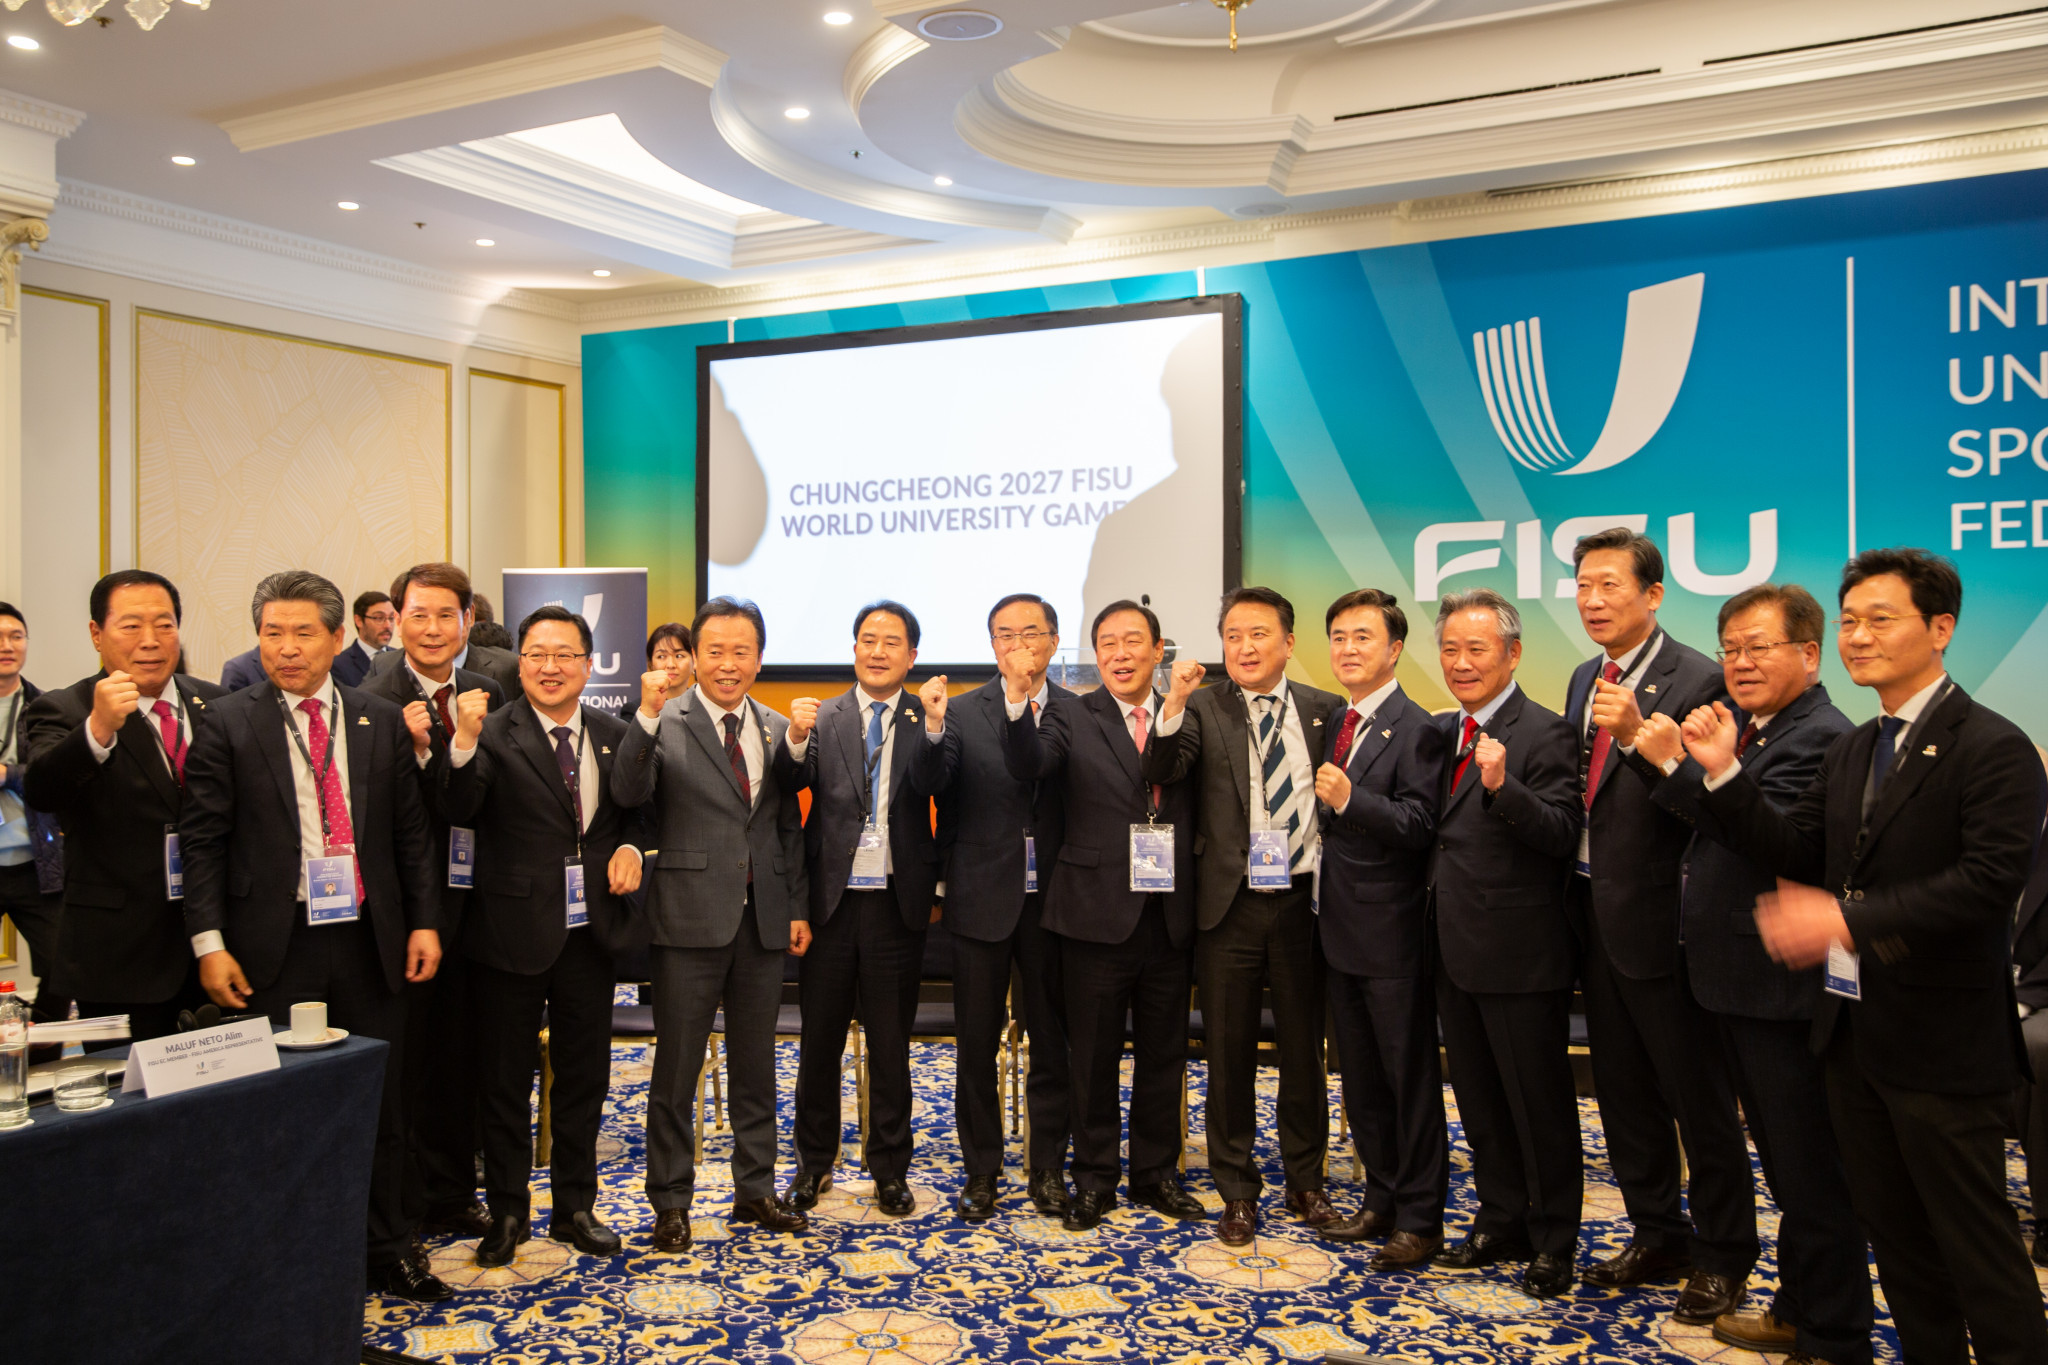 Despite Chungcheong being awarded the 2027 FISU World University Games in November 2022, an Organising Committee has only just been formed ©FISU